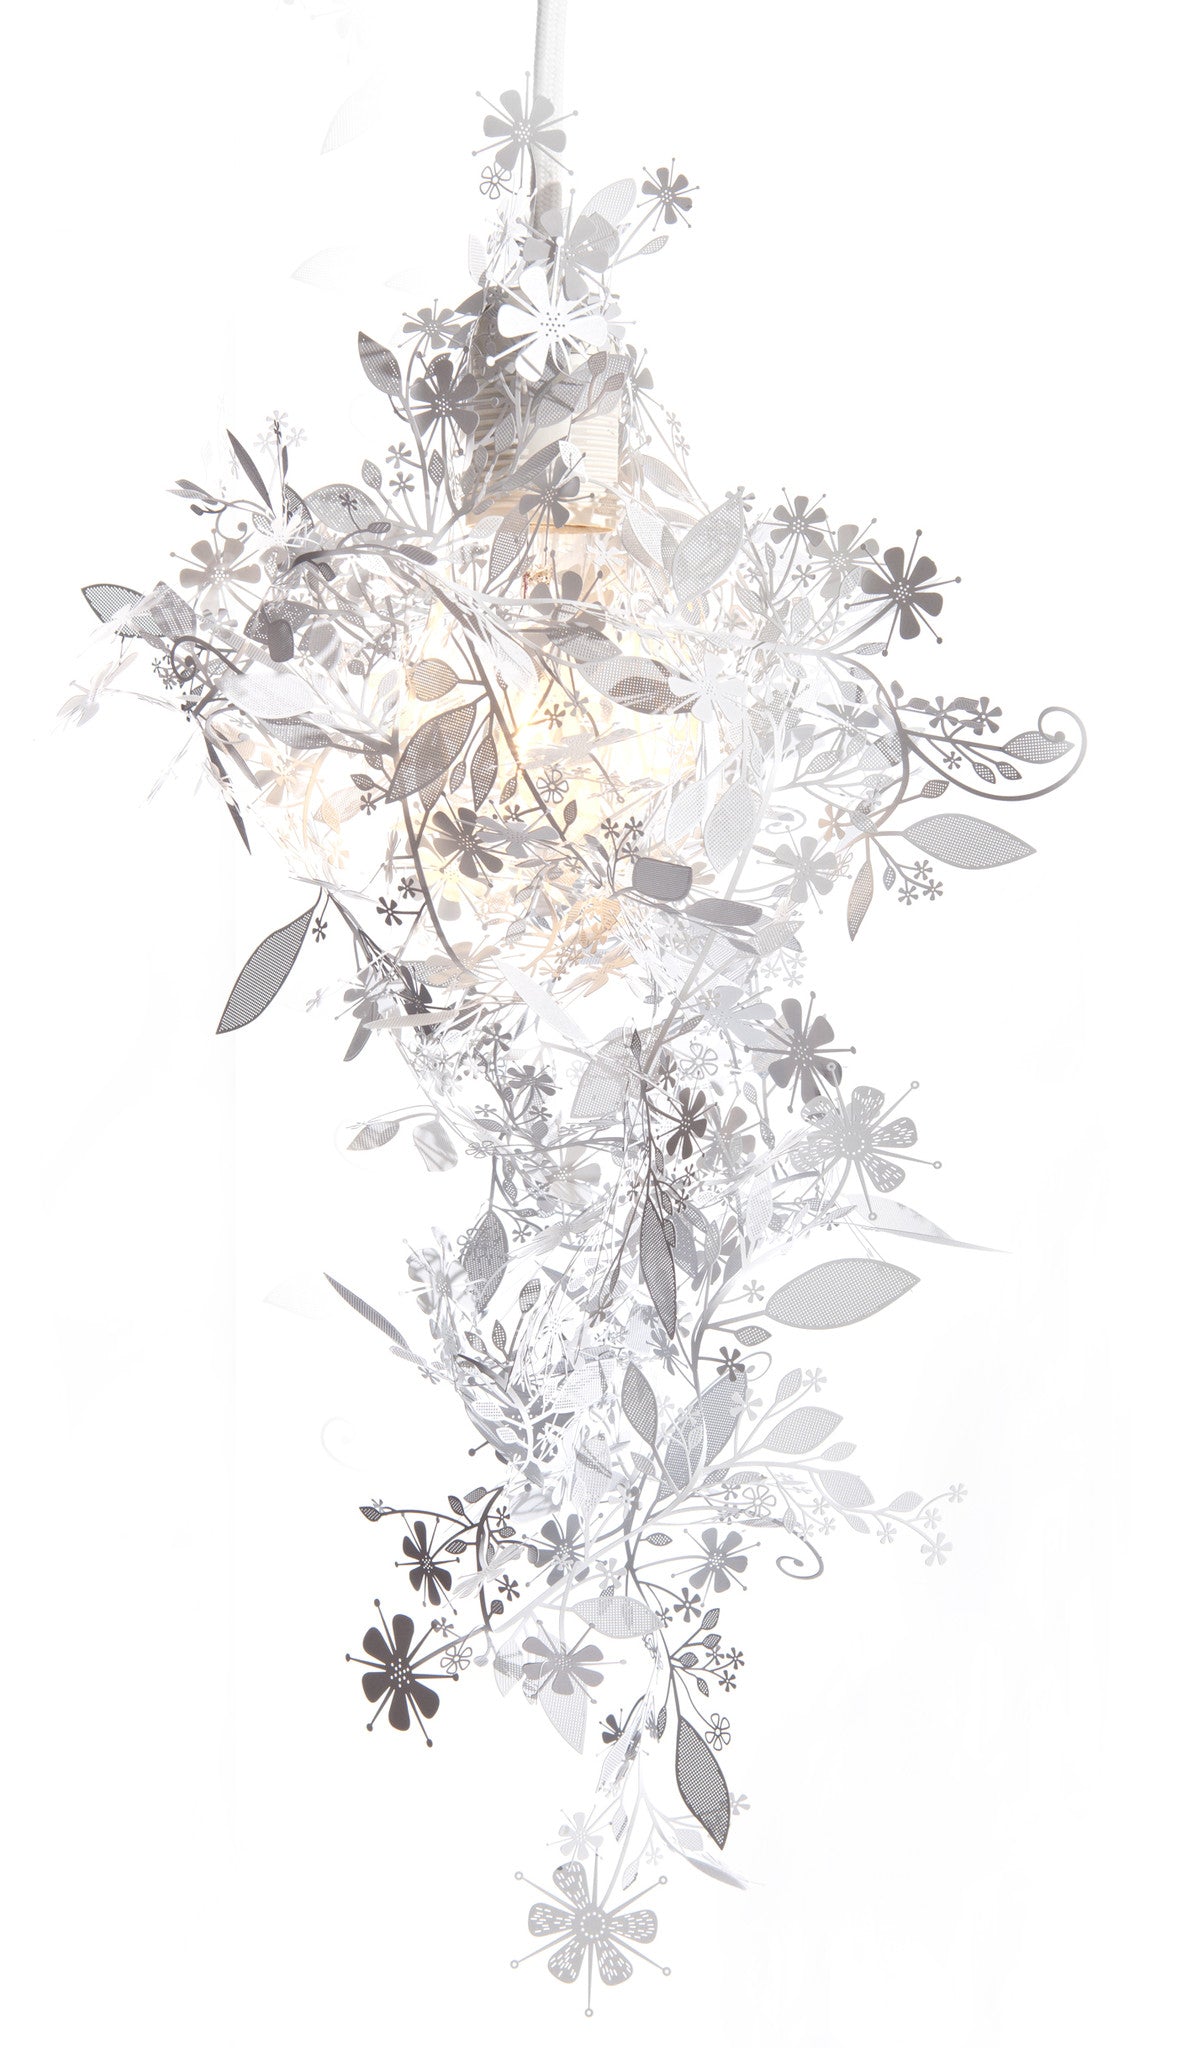 Tord Boonjtes White Metal Chrome Plated Floral Garland Lamp by Artecnica